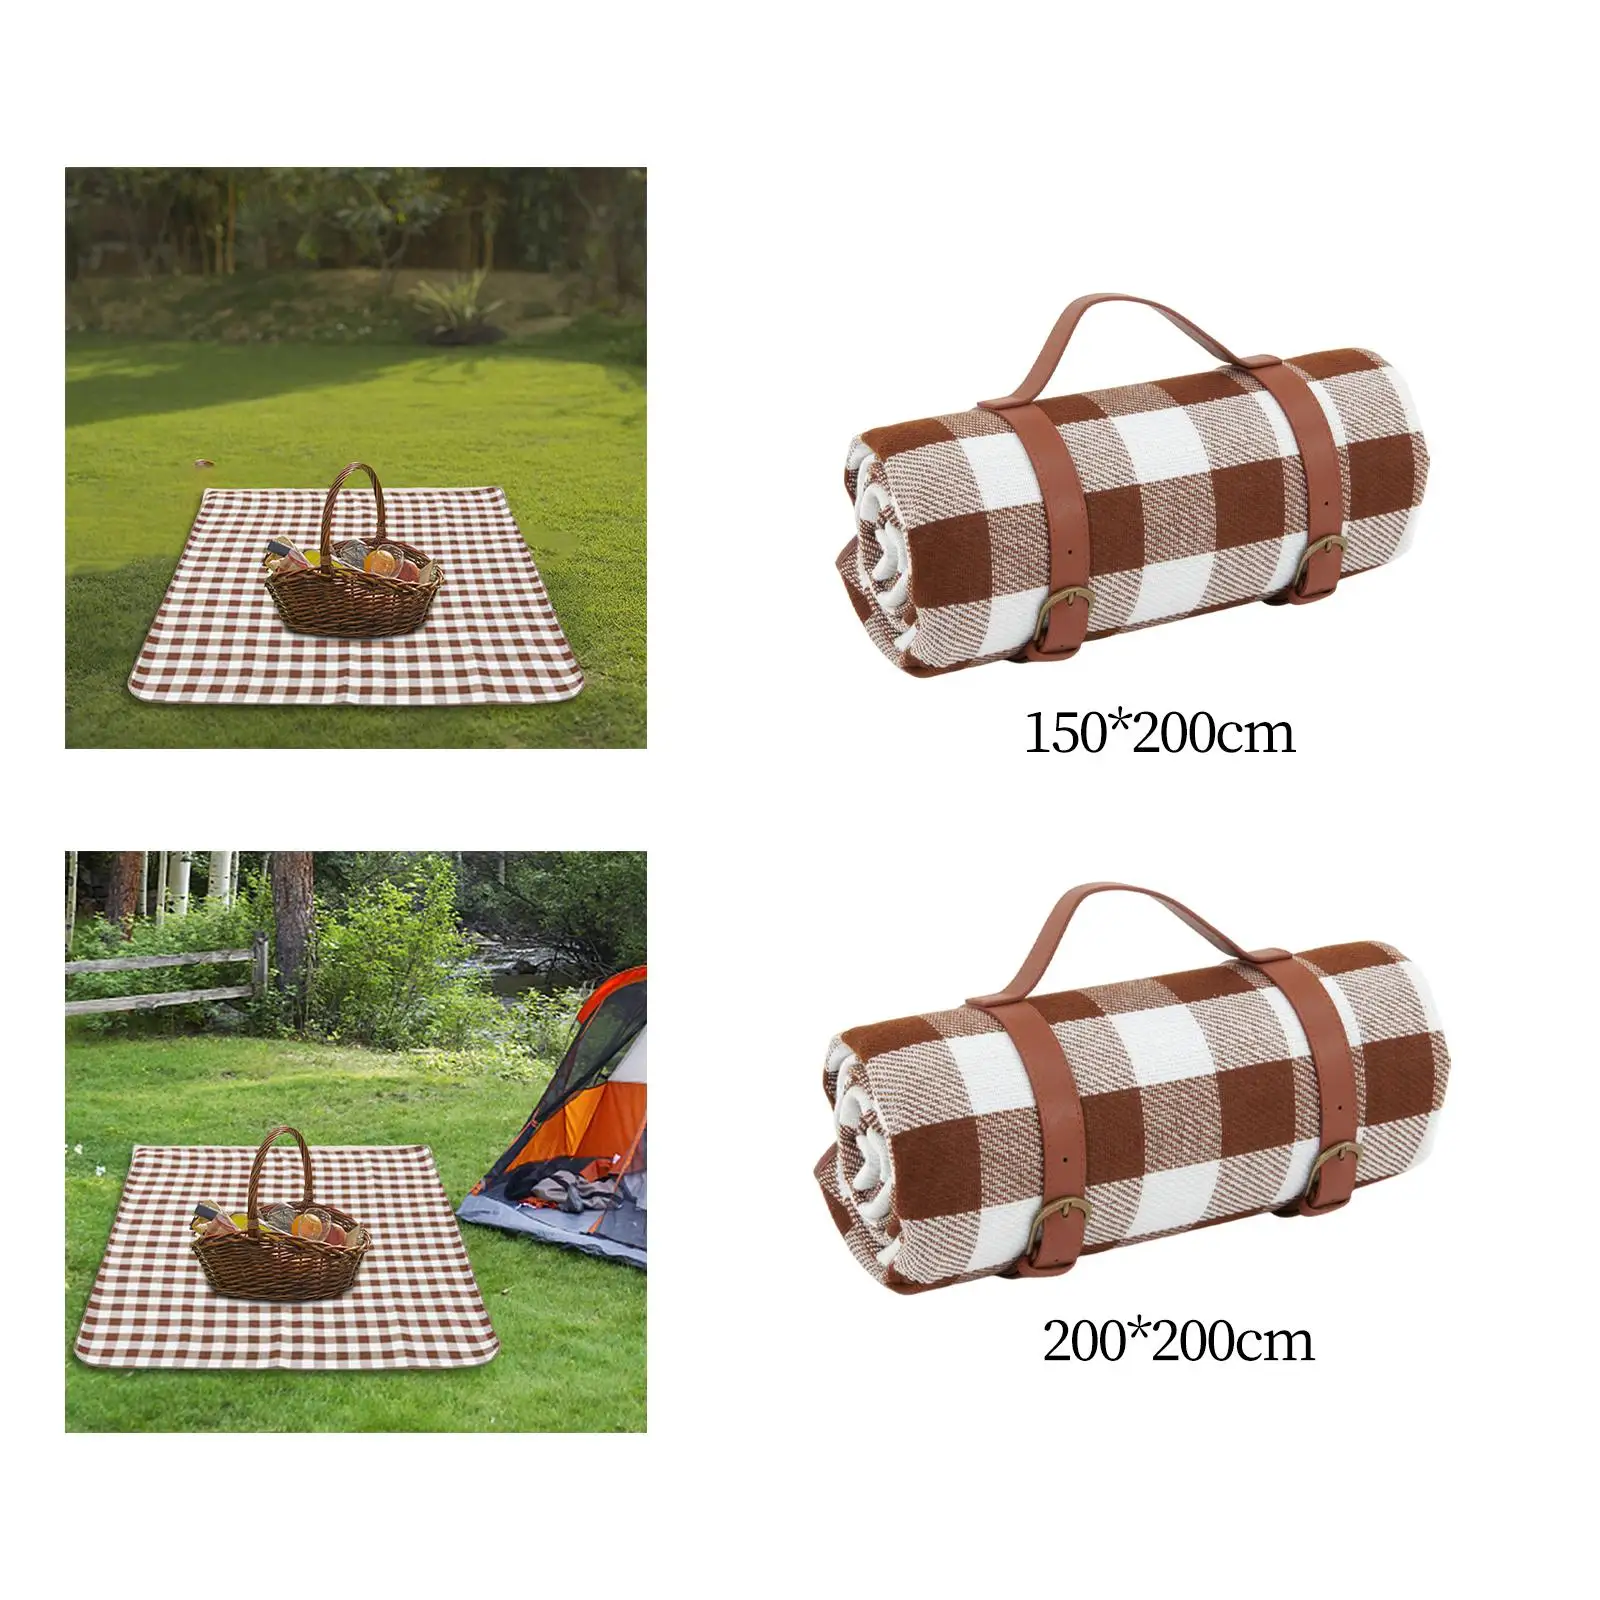 Picnic Blanket PU Leather Handle Outdoor Blanket Portable beach mat Picnic Mat